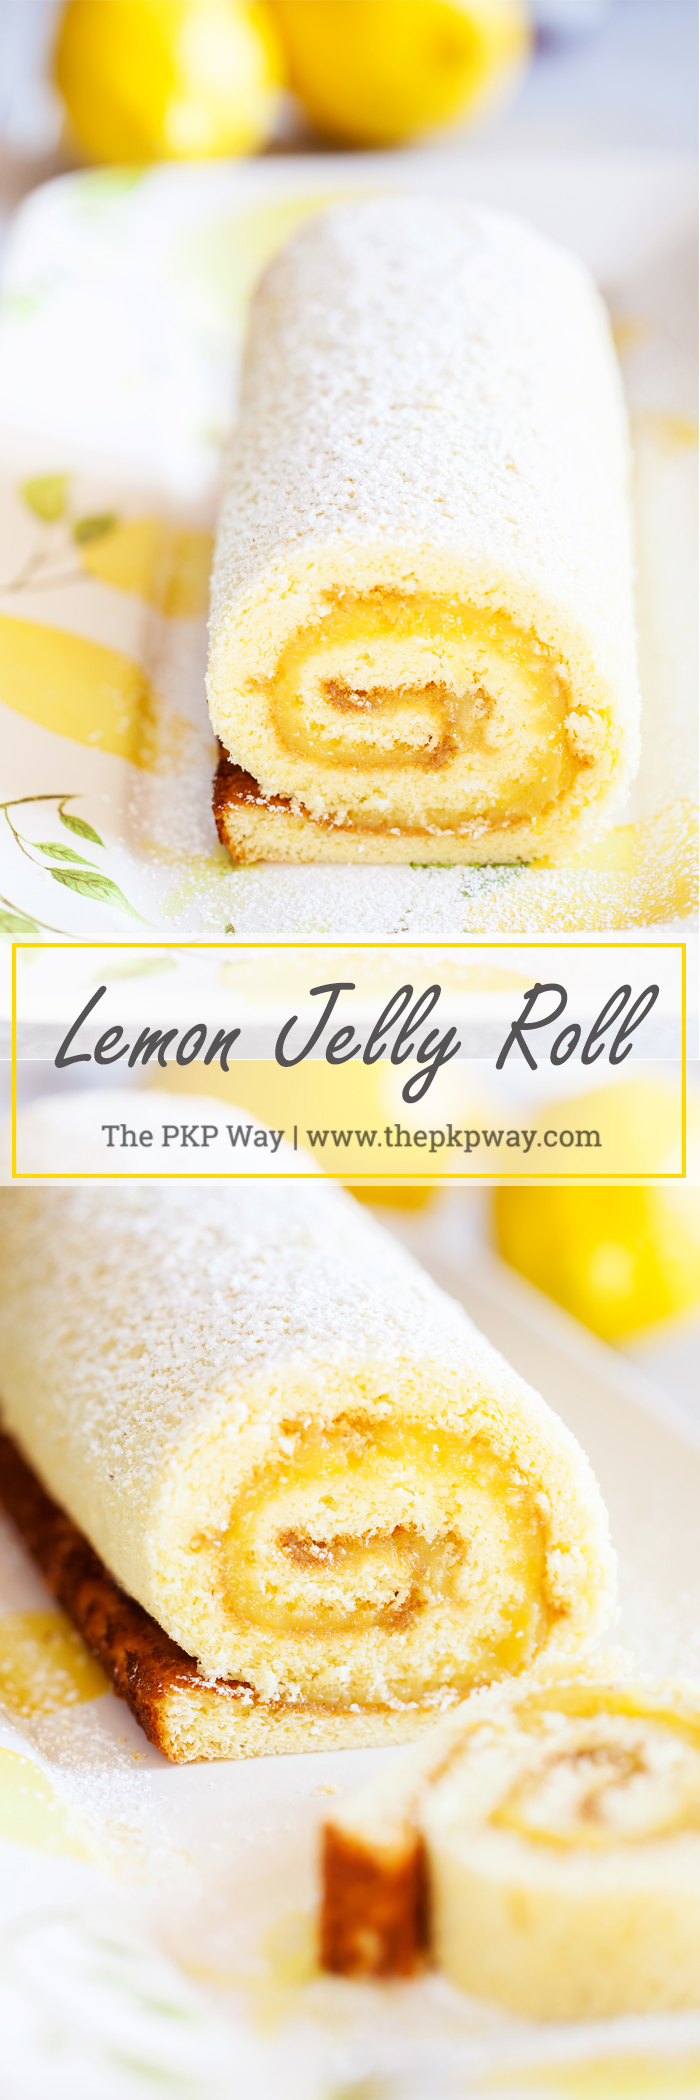 Soft and tender cake filled with lemon curd and rolled into a log makes this Lemon Jelly Roll a beautiful and impressive dessert for your guests this Easter and summer.